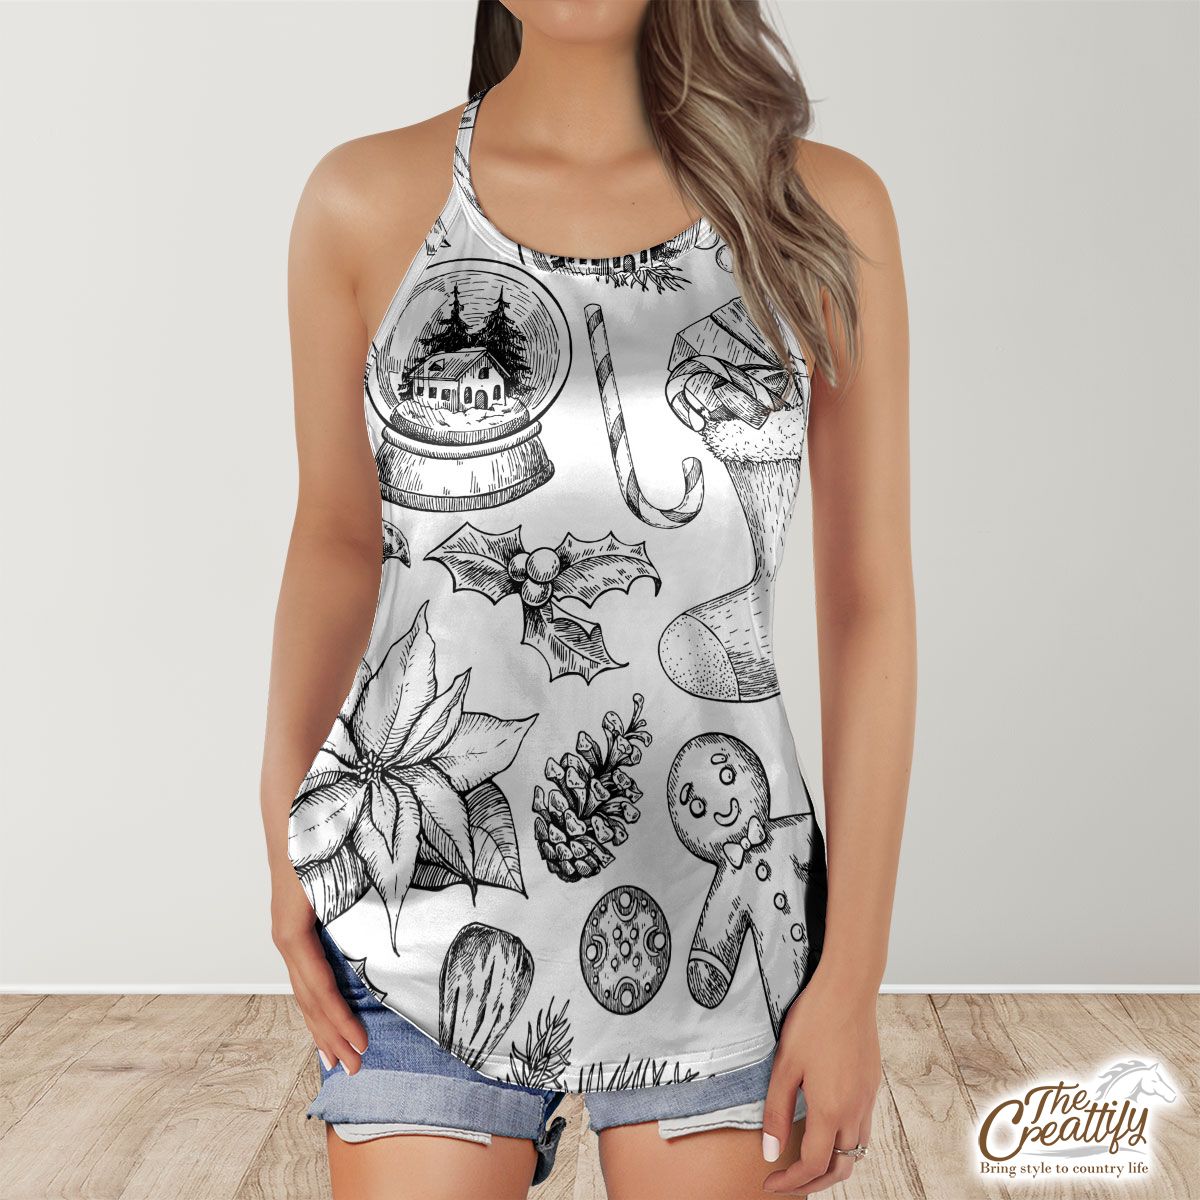 Snowglobe, Candy Cande, Gingerbread Man And Holly Leaf Pattern Criss Cross Tanktop